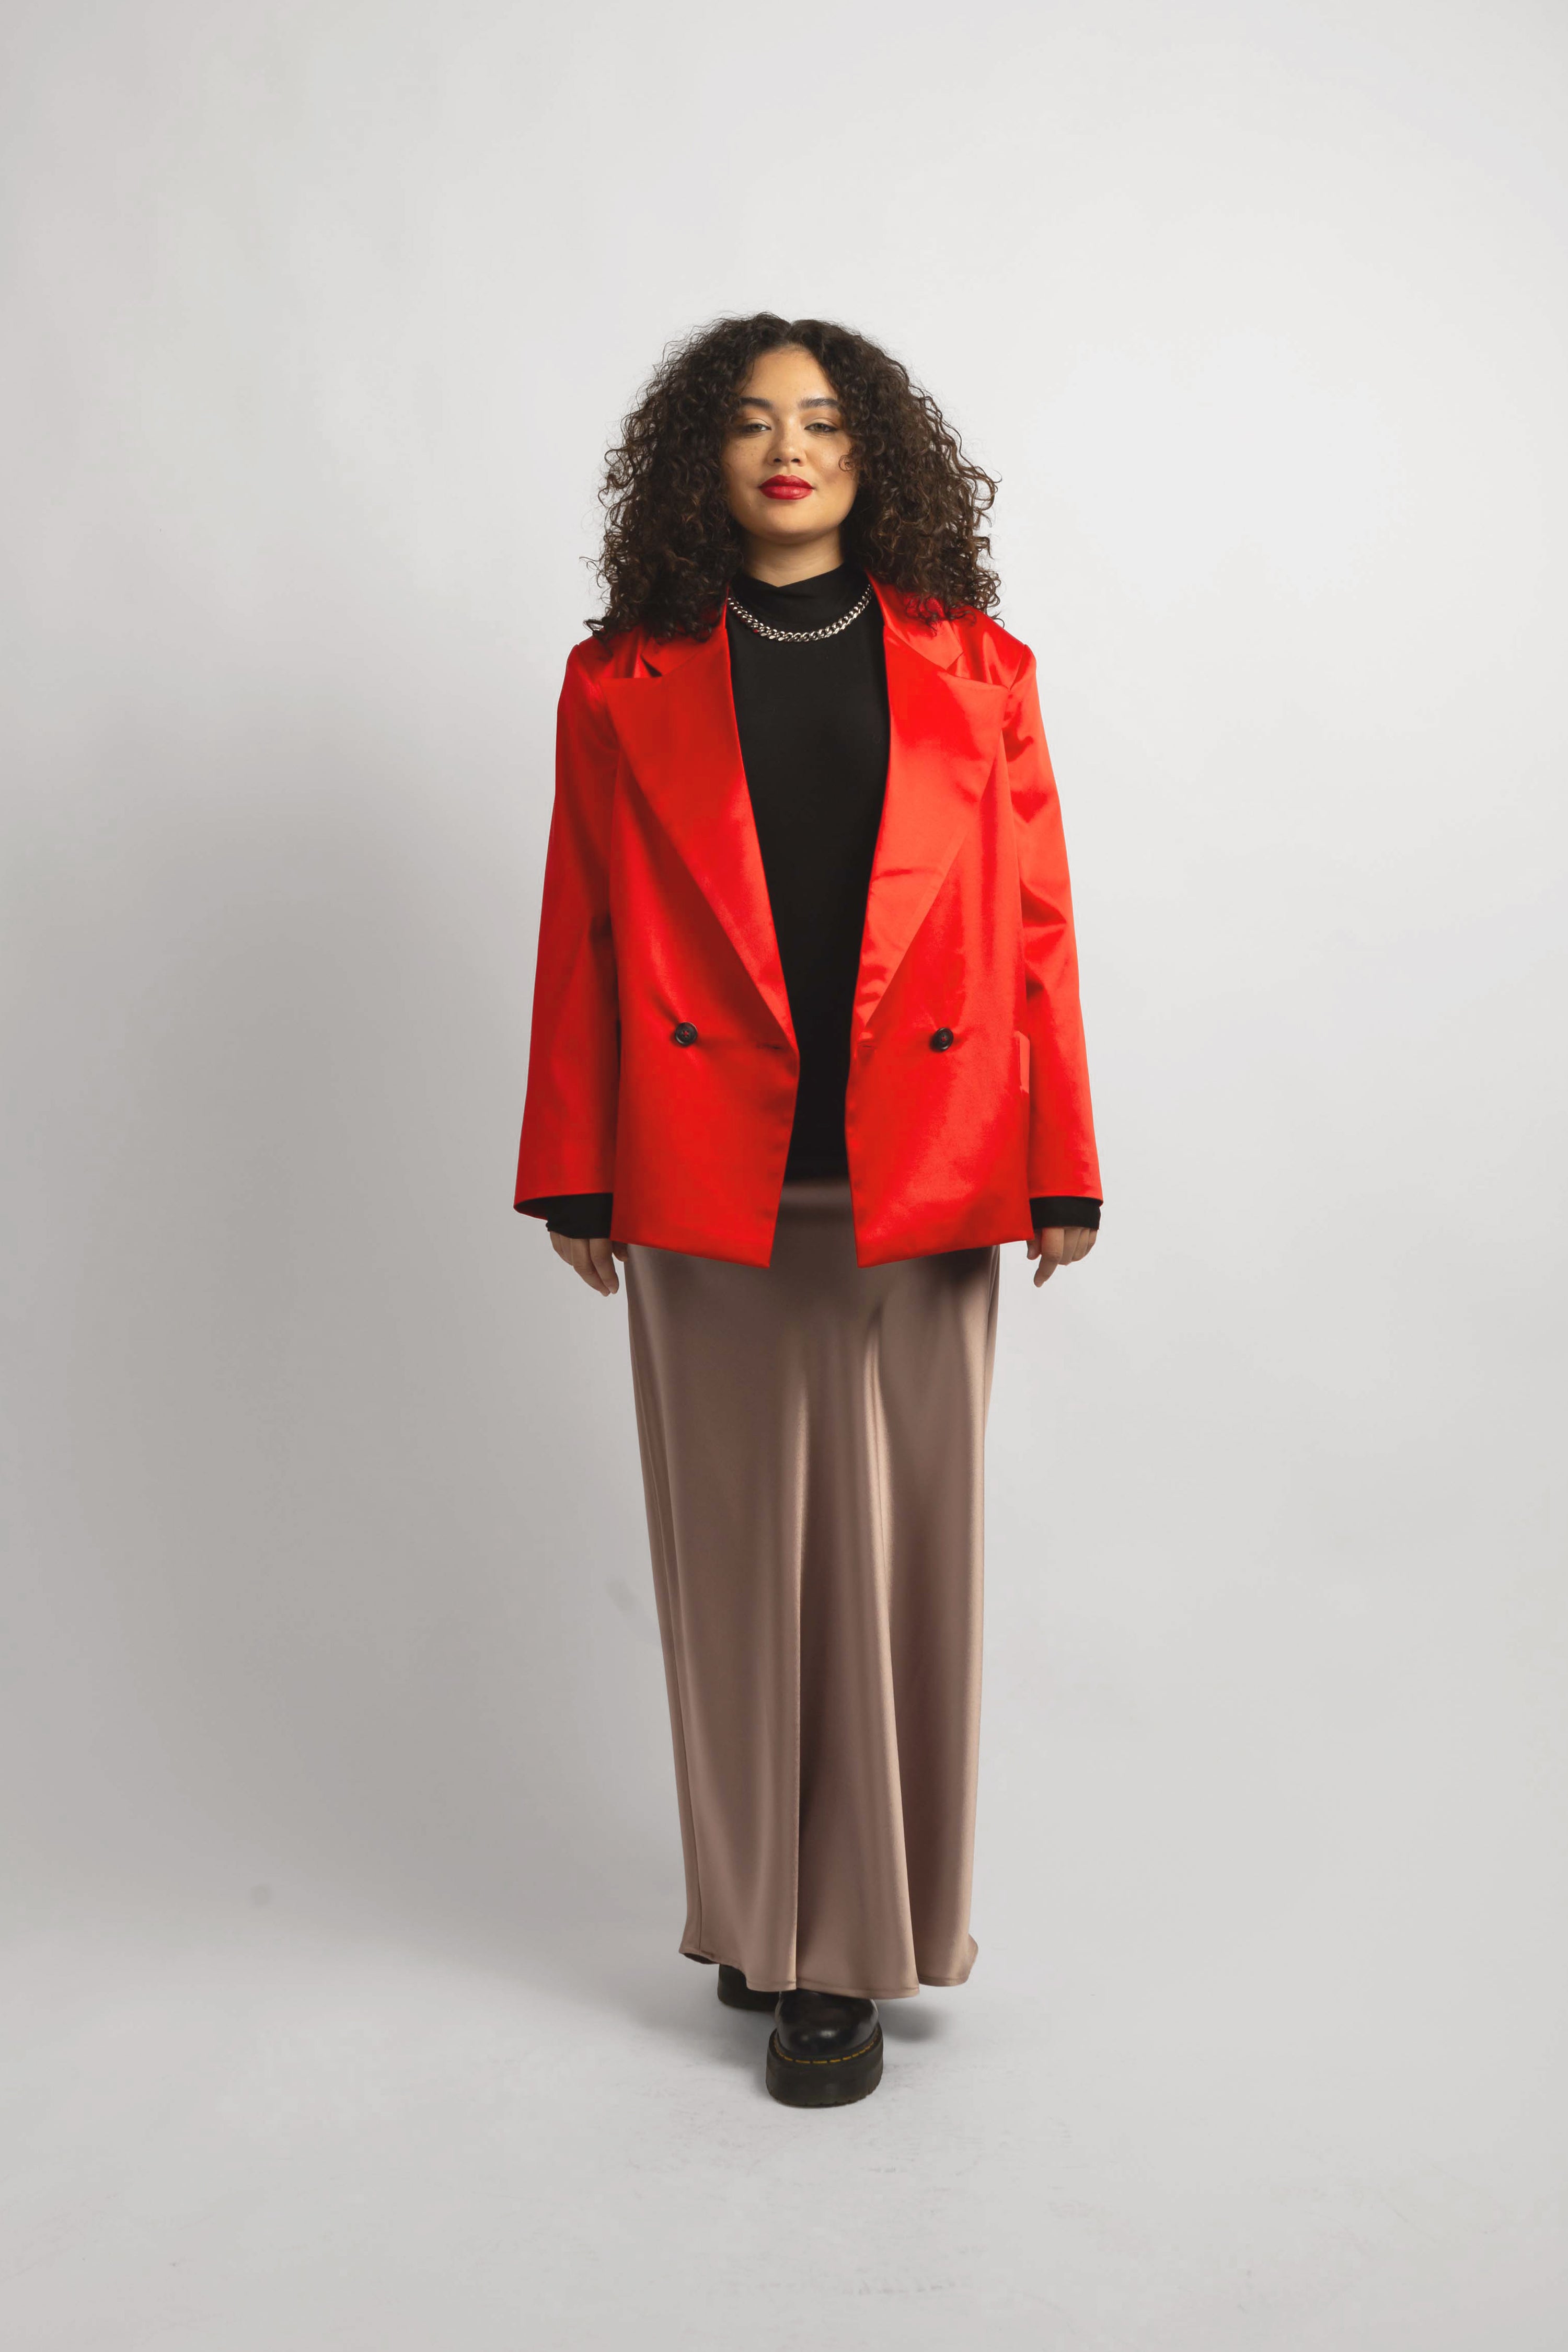 model wearing the red Lexi blazer with slip dress